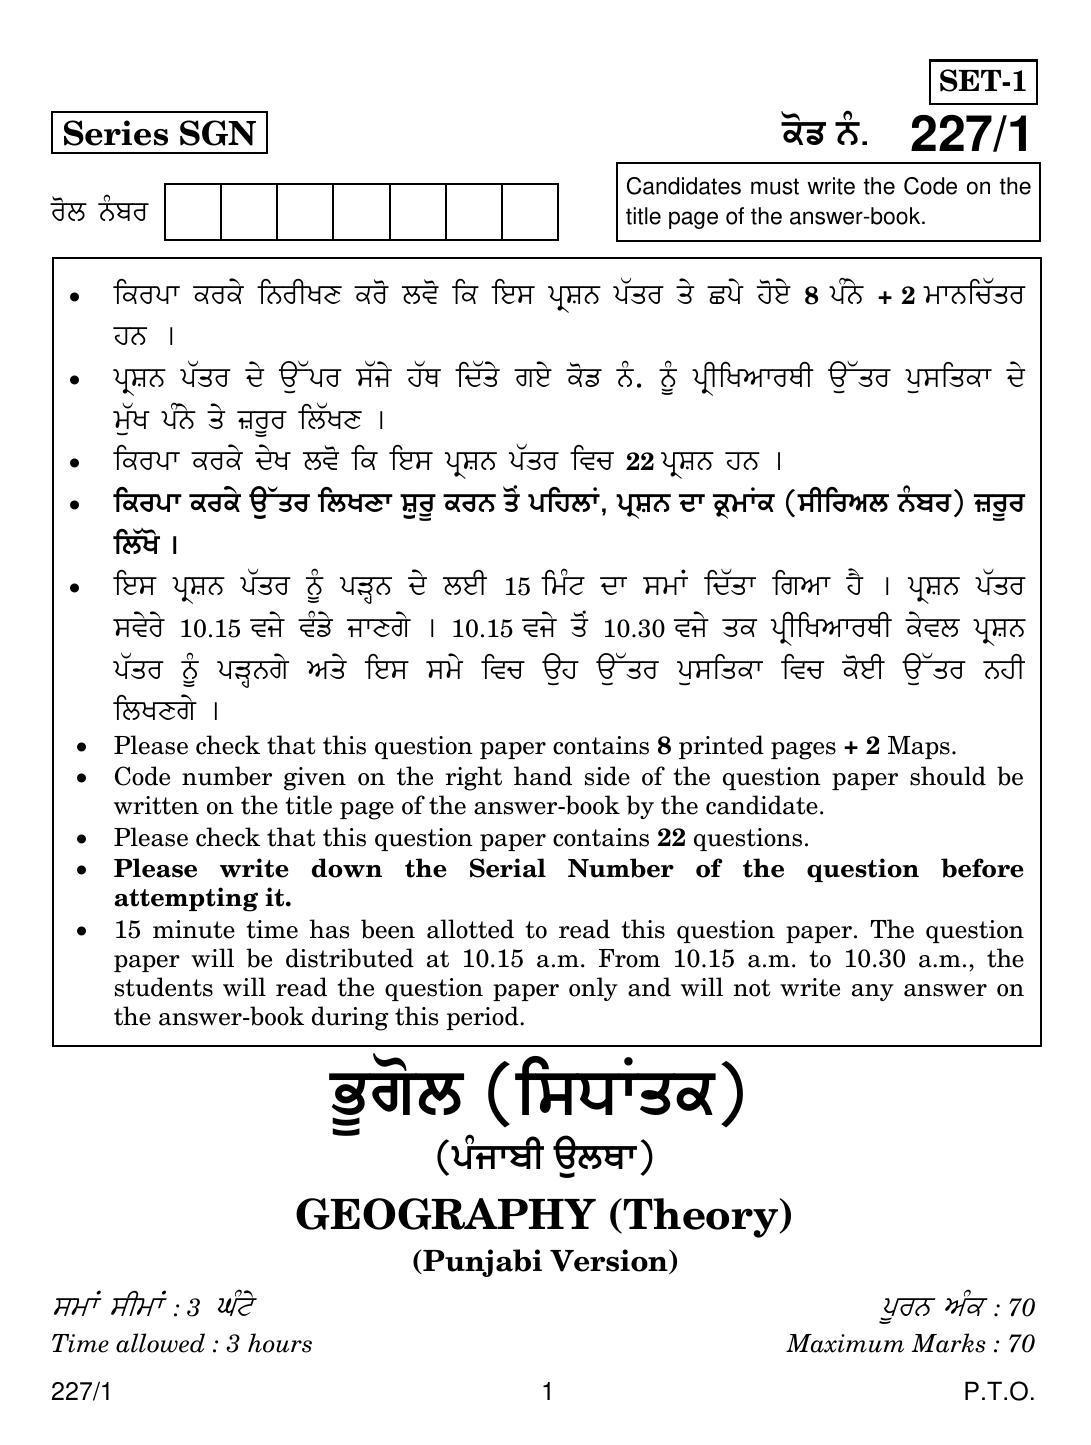 CBSE Class 12 227-1 GEOGRAPHY PUNJABI VERSION 2018 Question Paper - Page 1